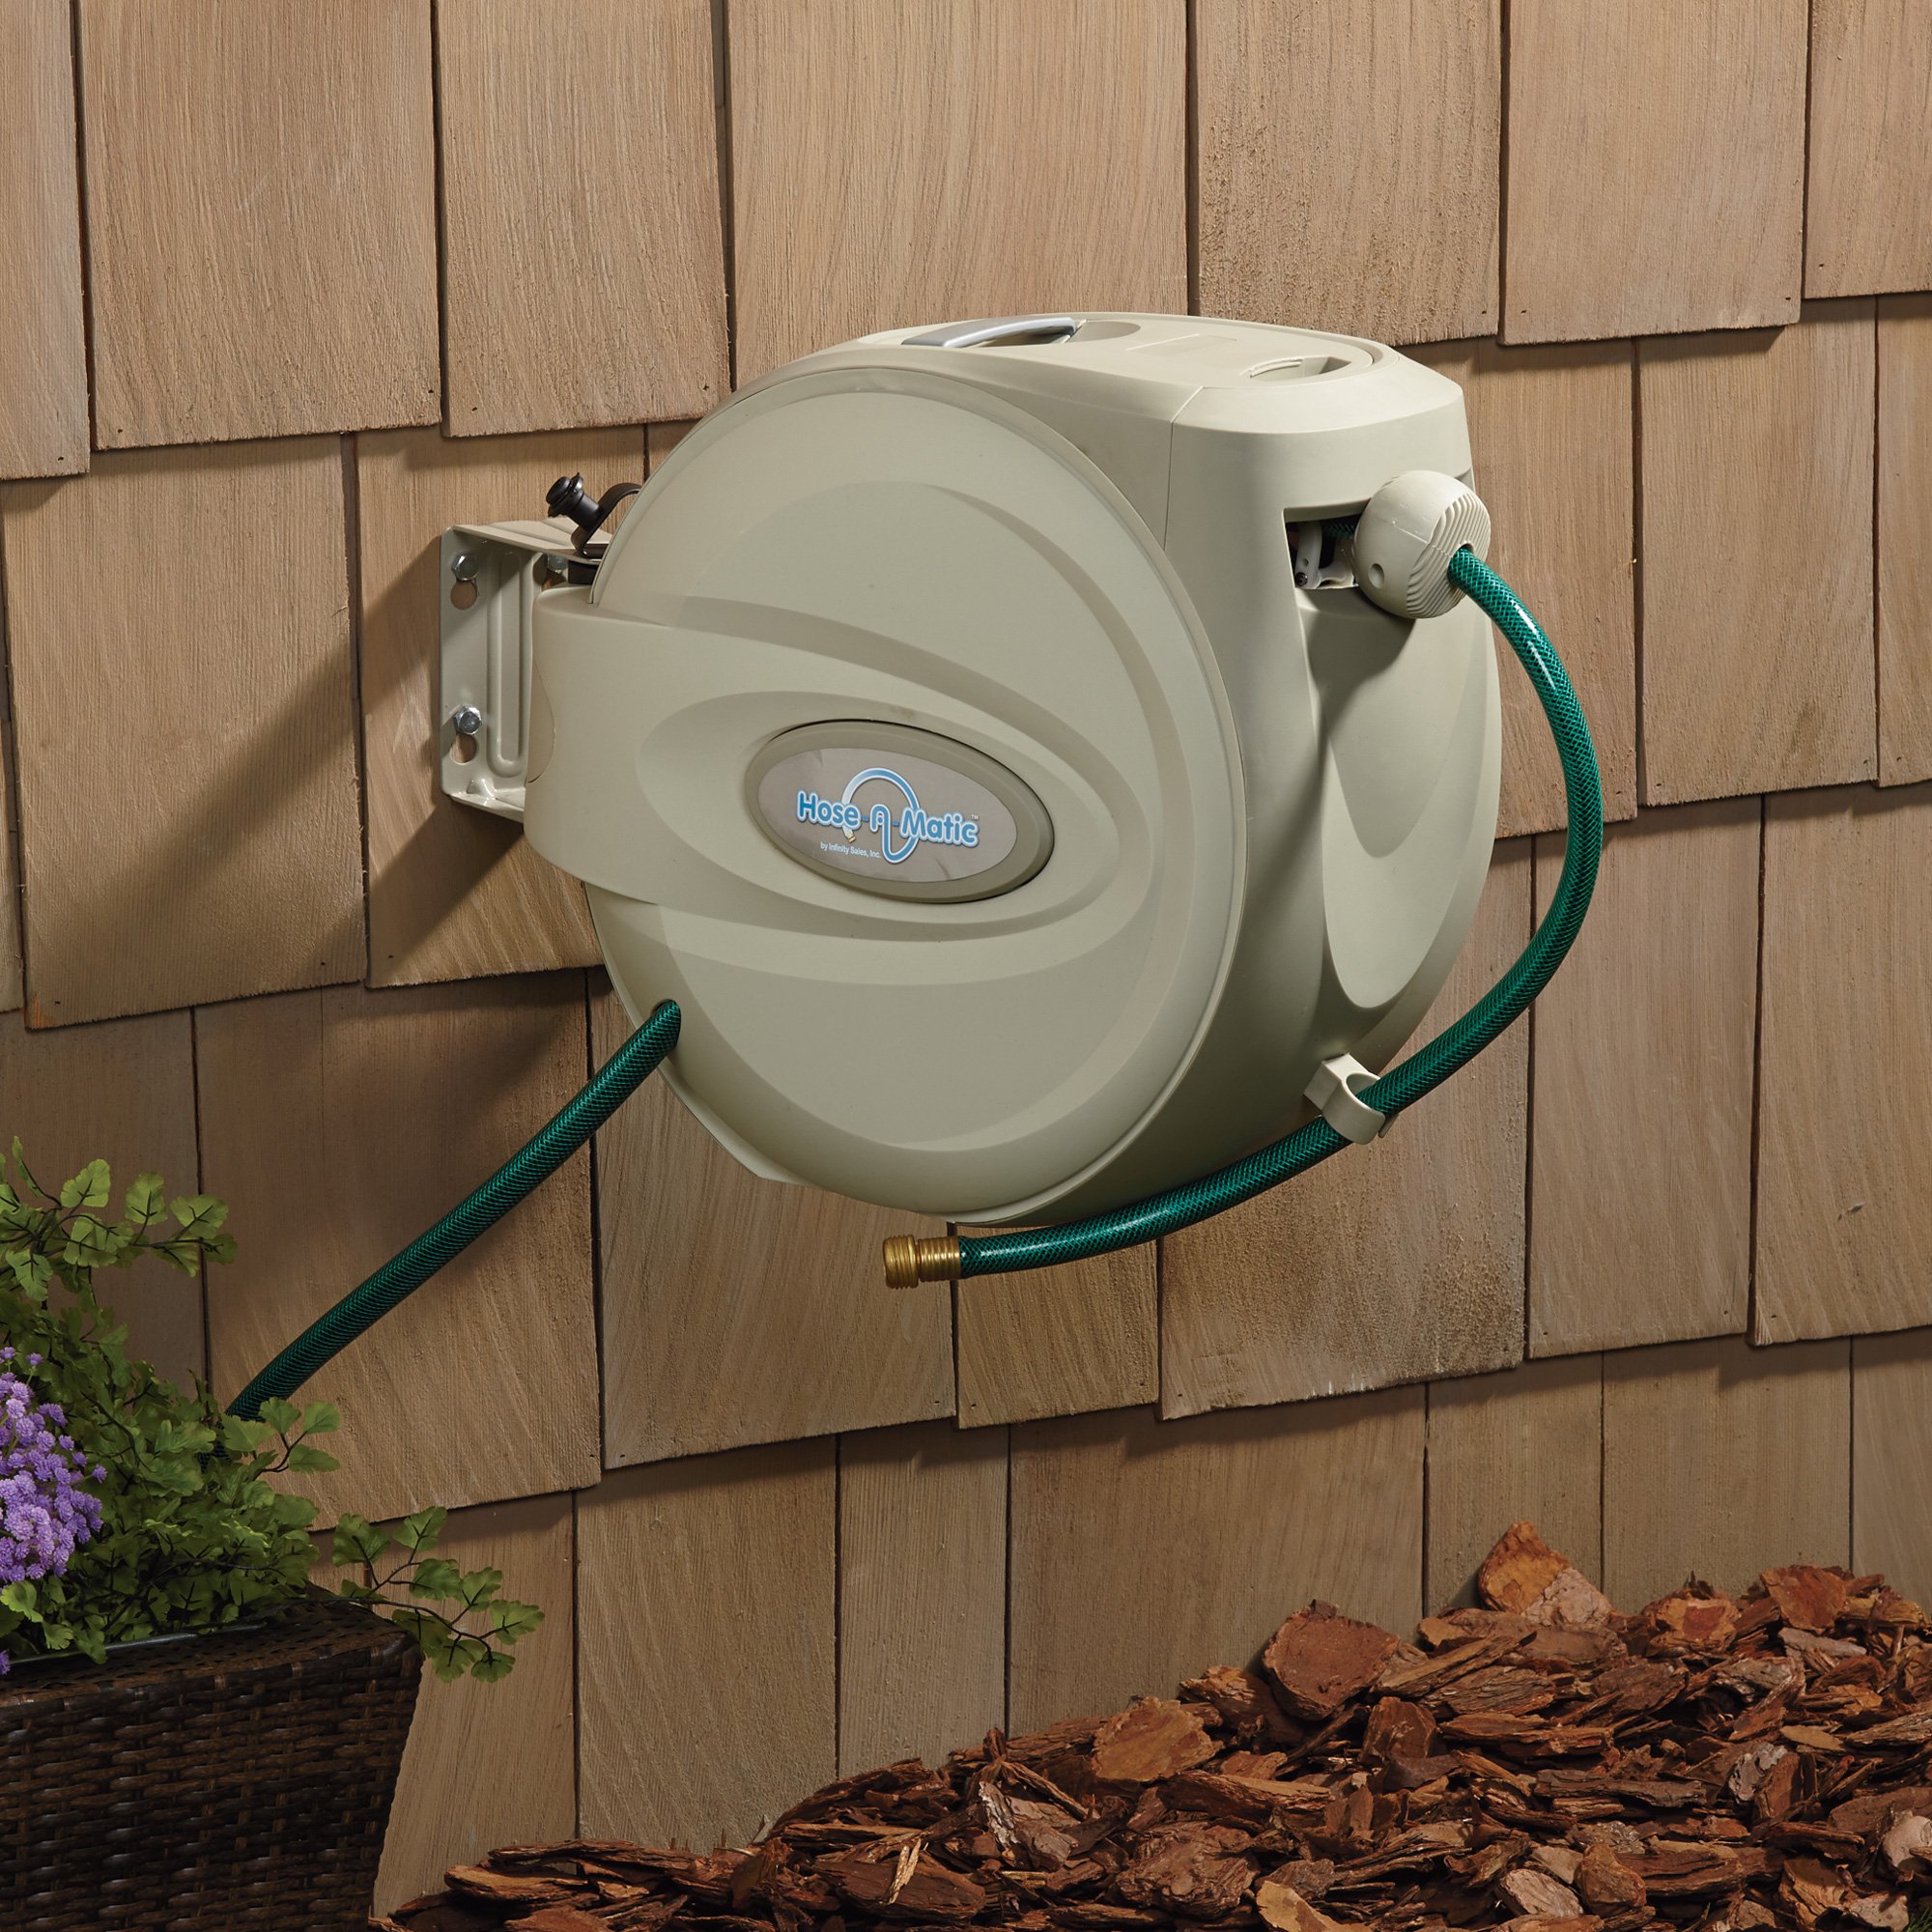 Hose-A-Matic Wall-Mount Garden Hose Reel — Holds 5/8in. x 66ft. Hose,  Model# 88002